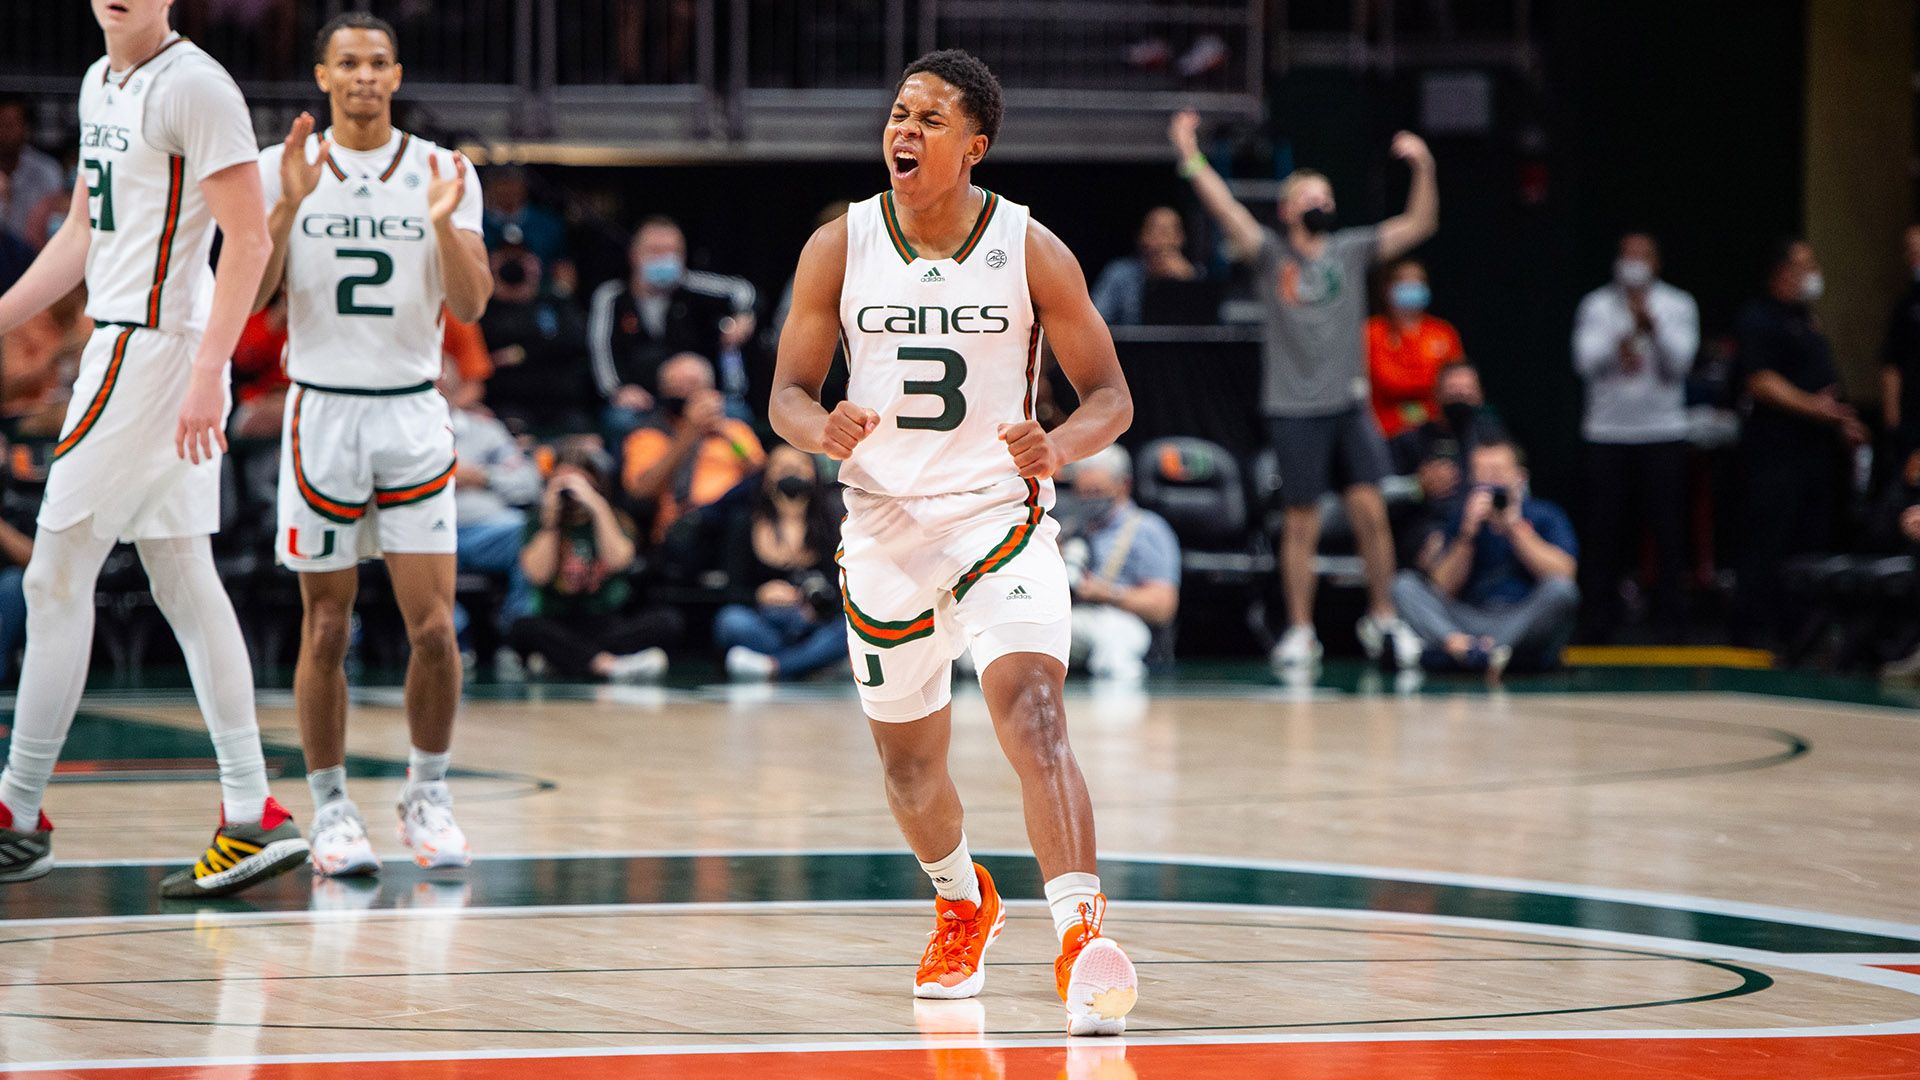 MBB Rallies from 18-Point Deficit to Beat Syracuse, 88-87